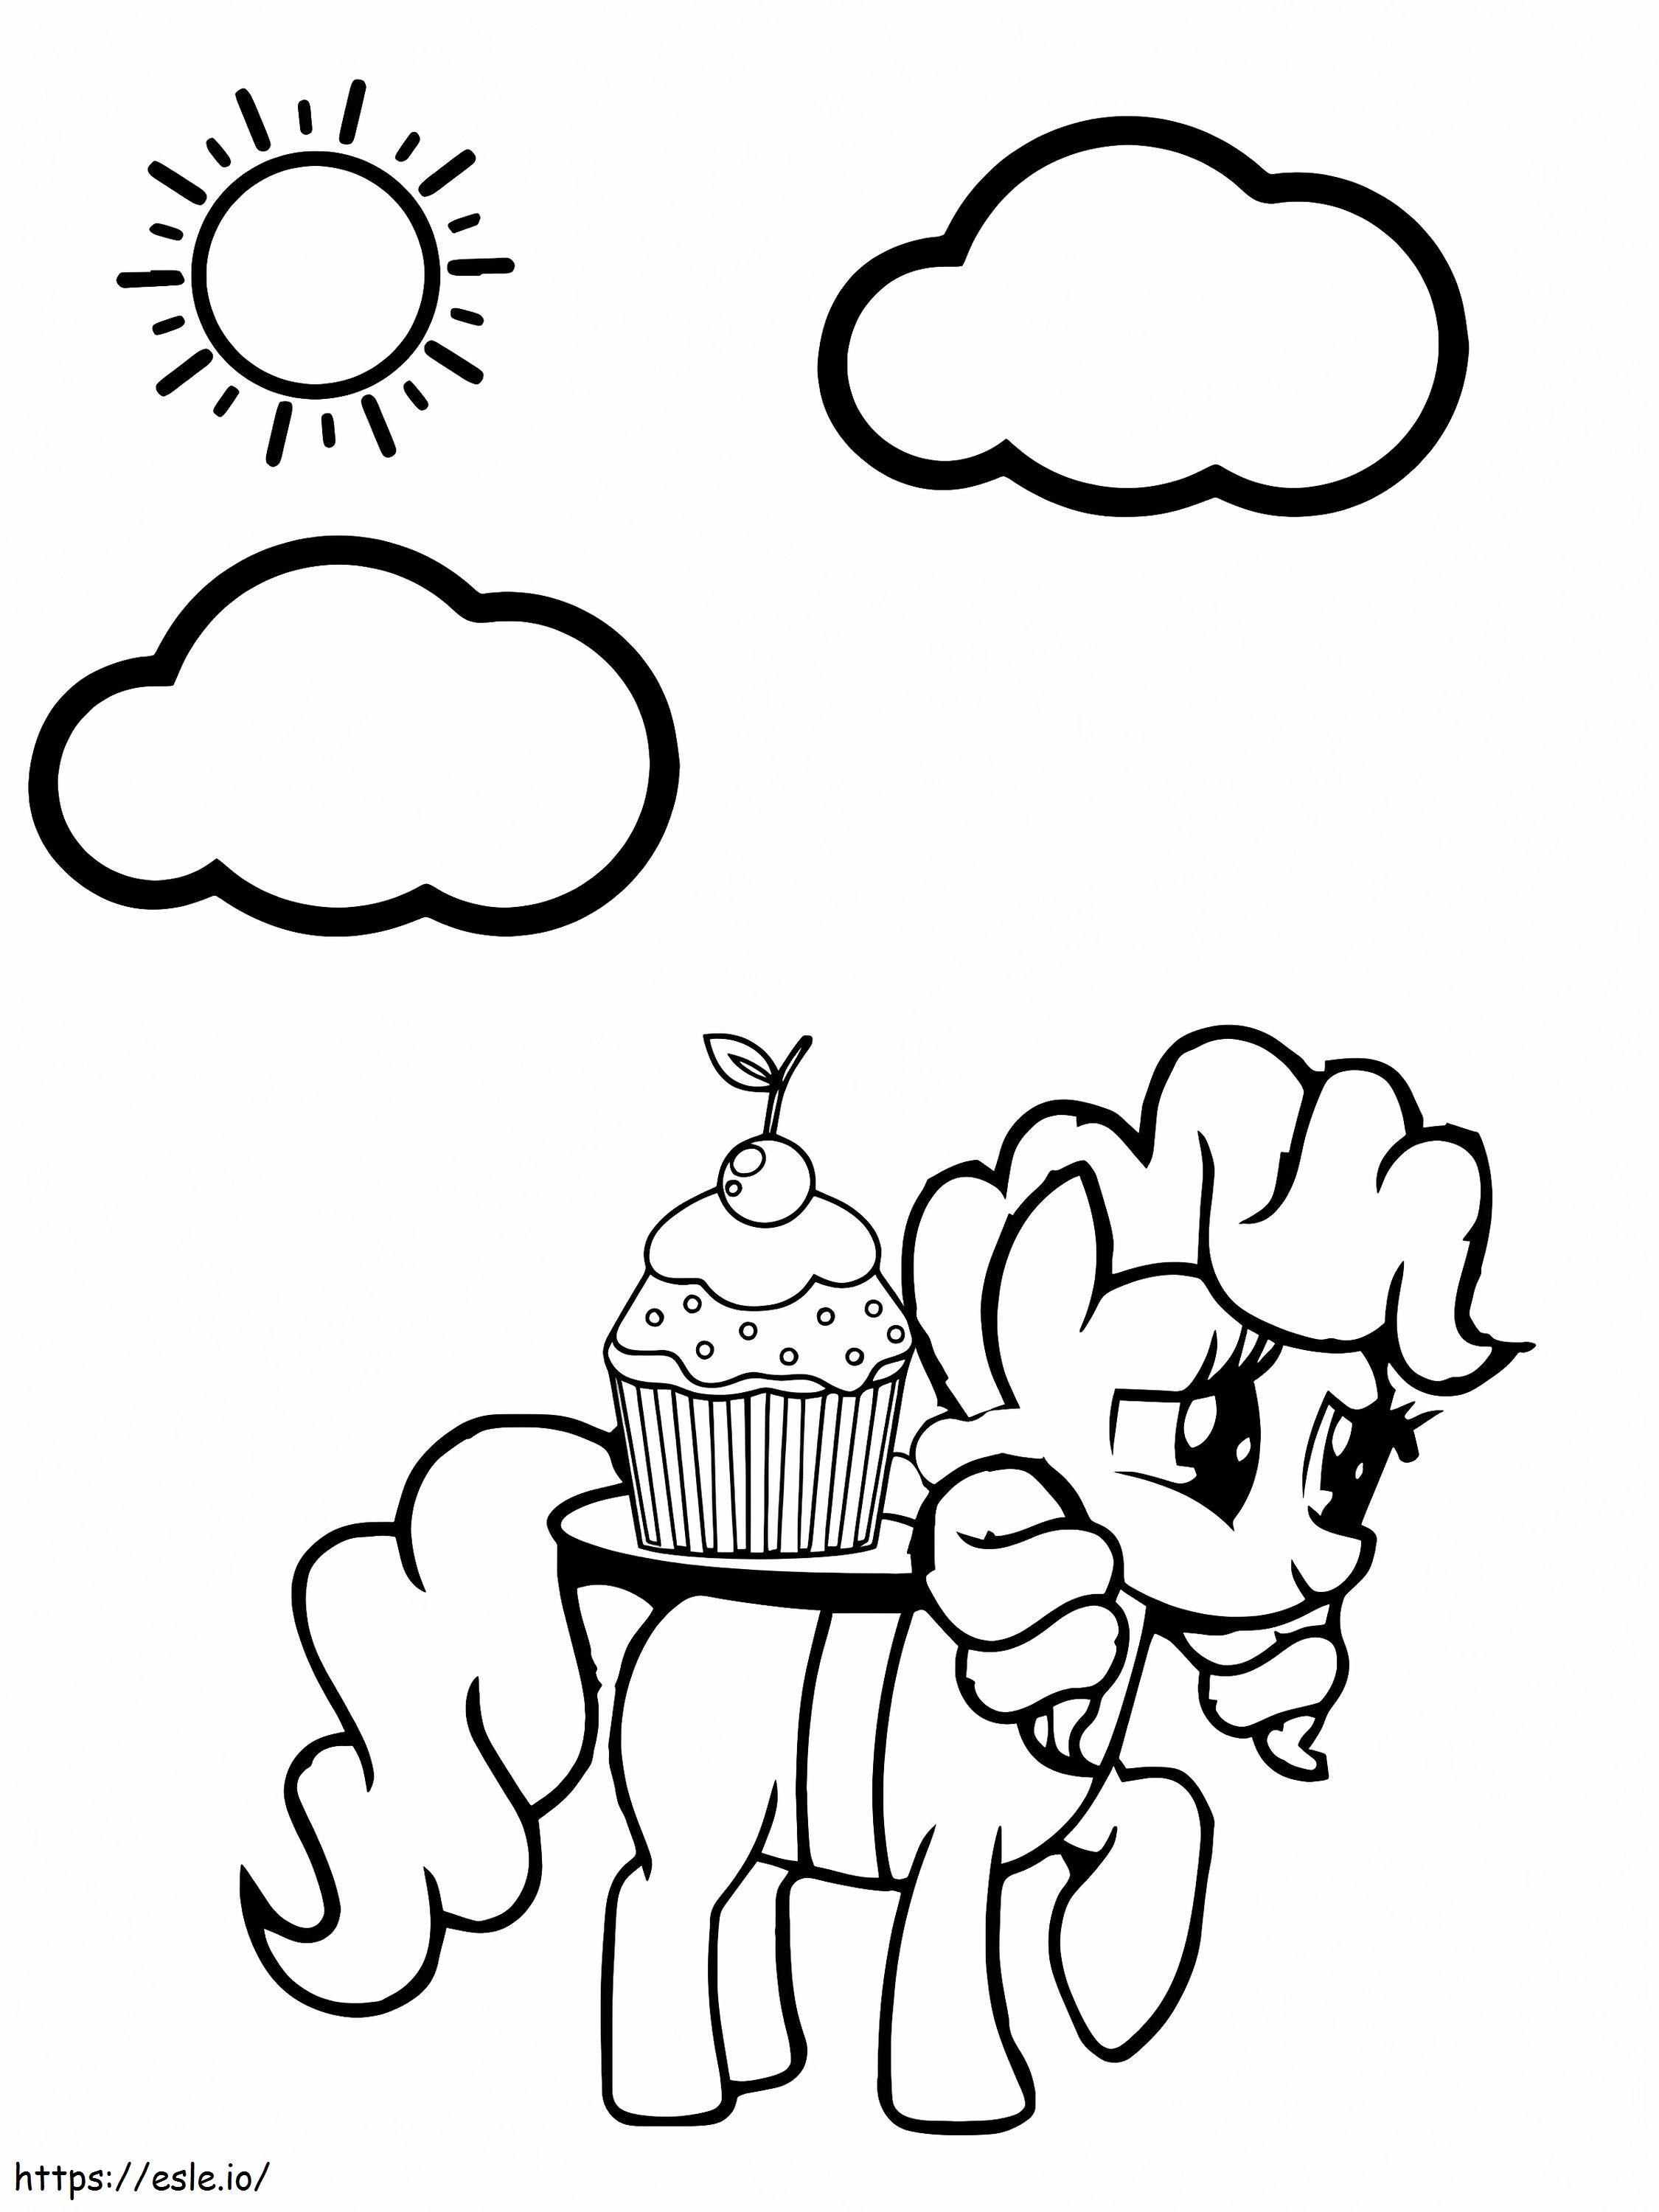 Sun Clouds And Mrs Cake coloring page